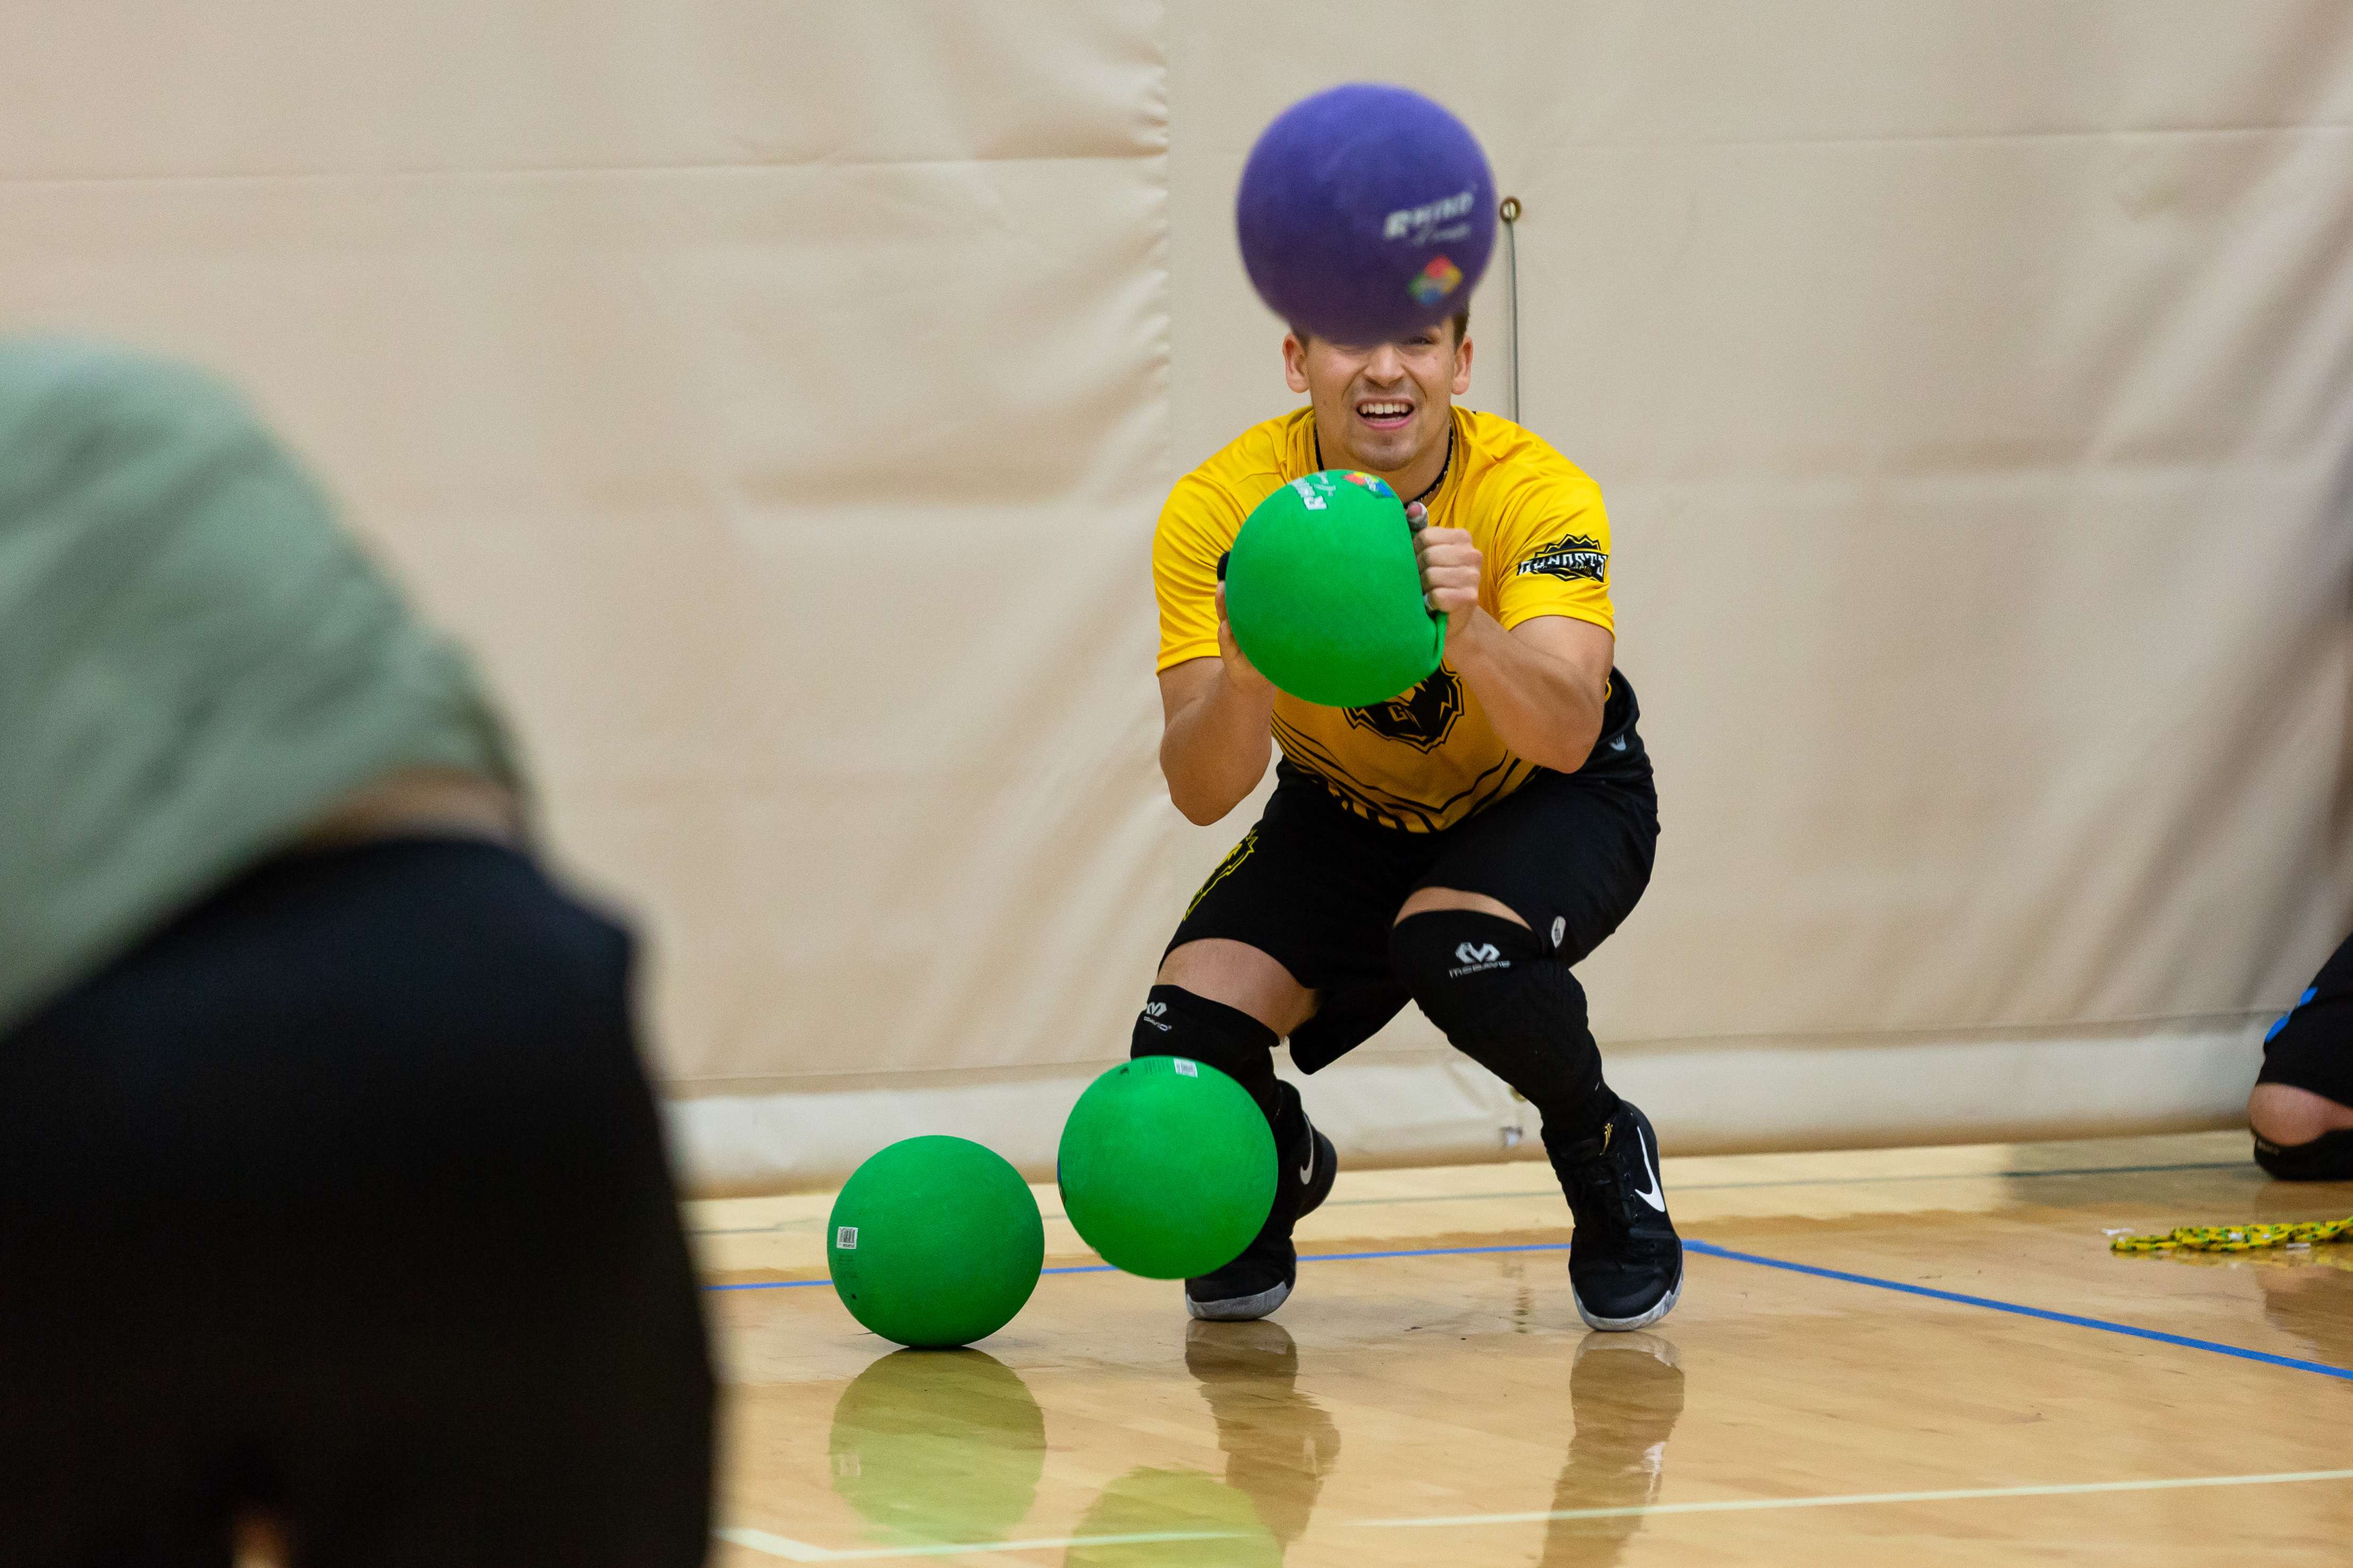 A dodgeball player ducks to prepare to dodge an incoming ball